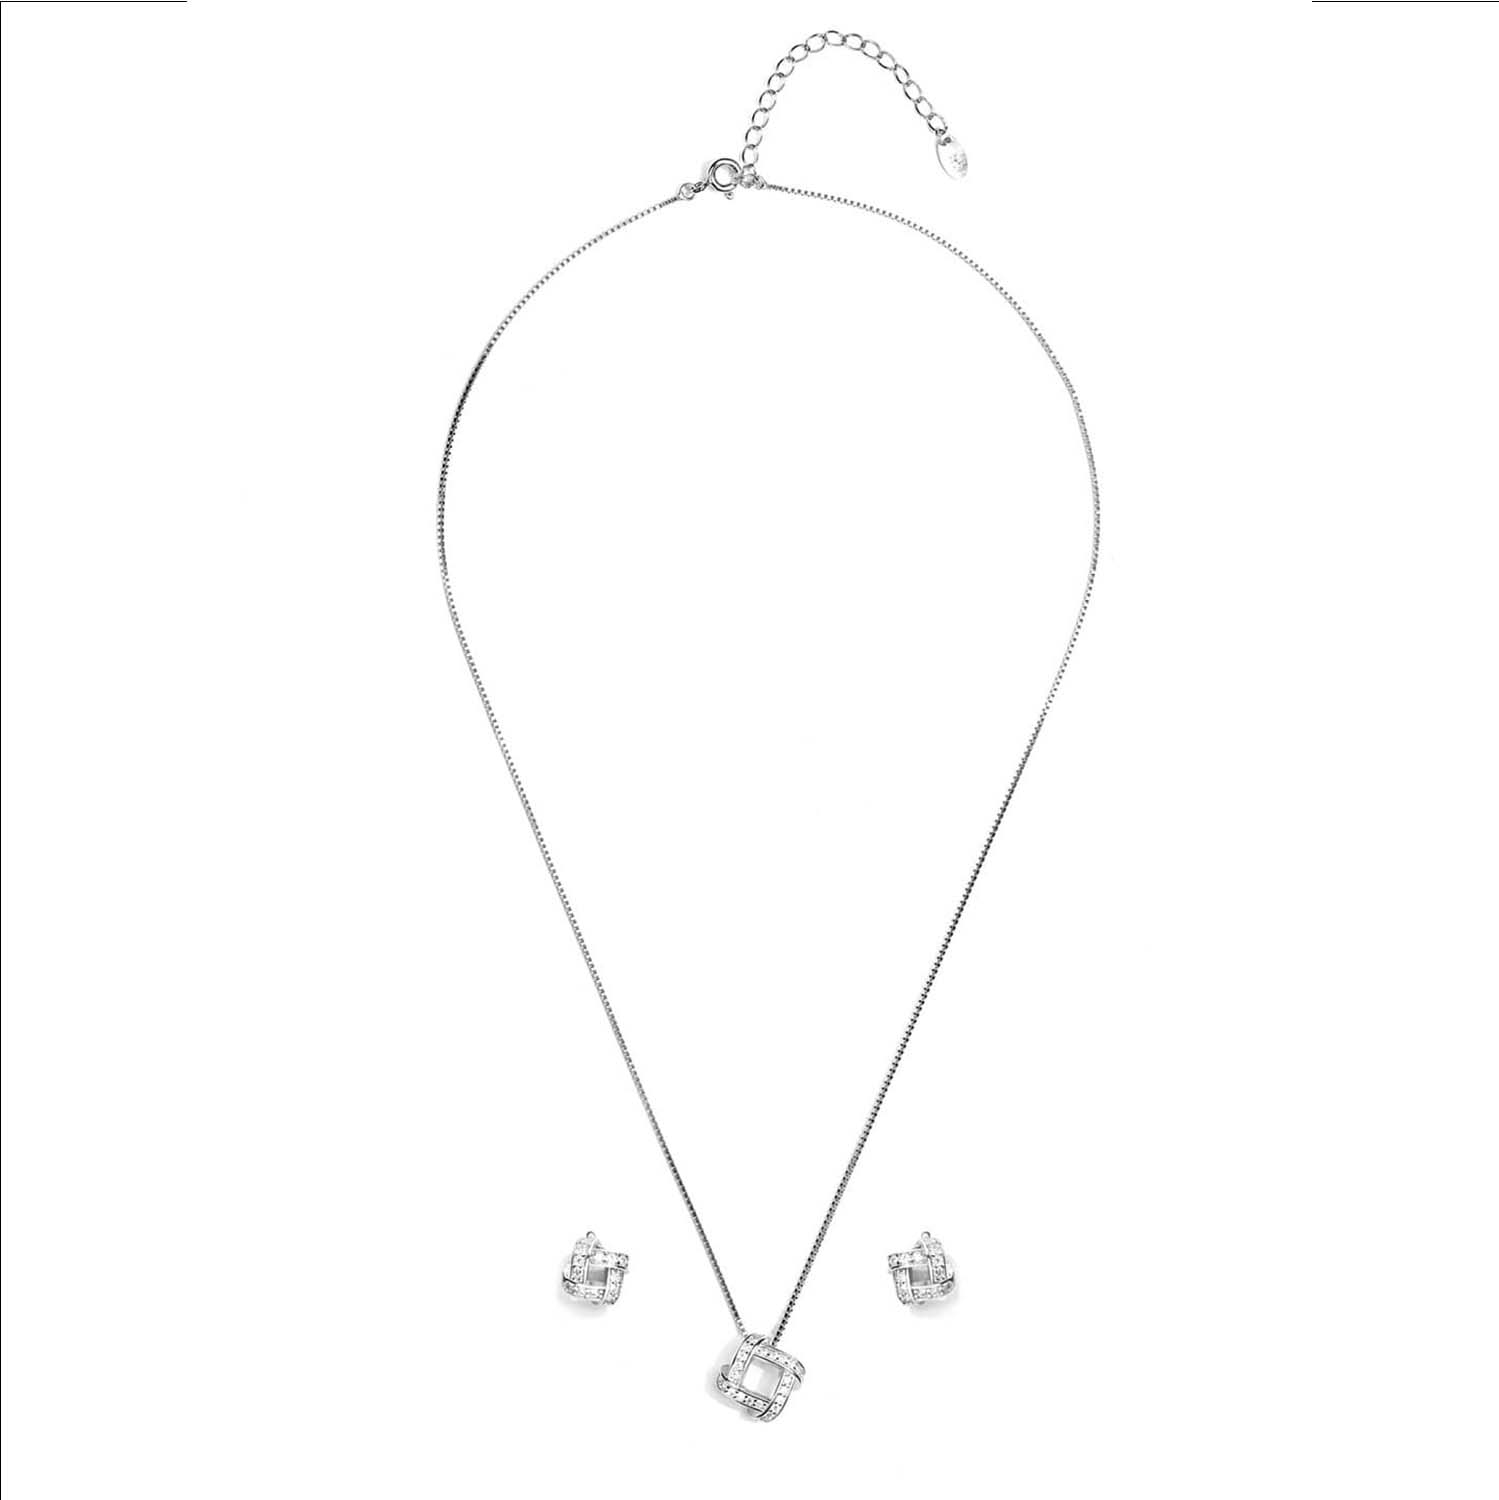 Abstract Brilliance Rhodium-Plated 925 Sterling Silver Jewelry Set